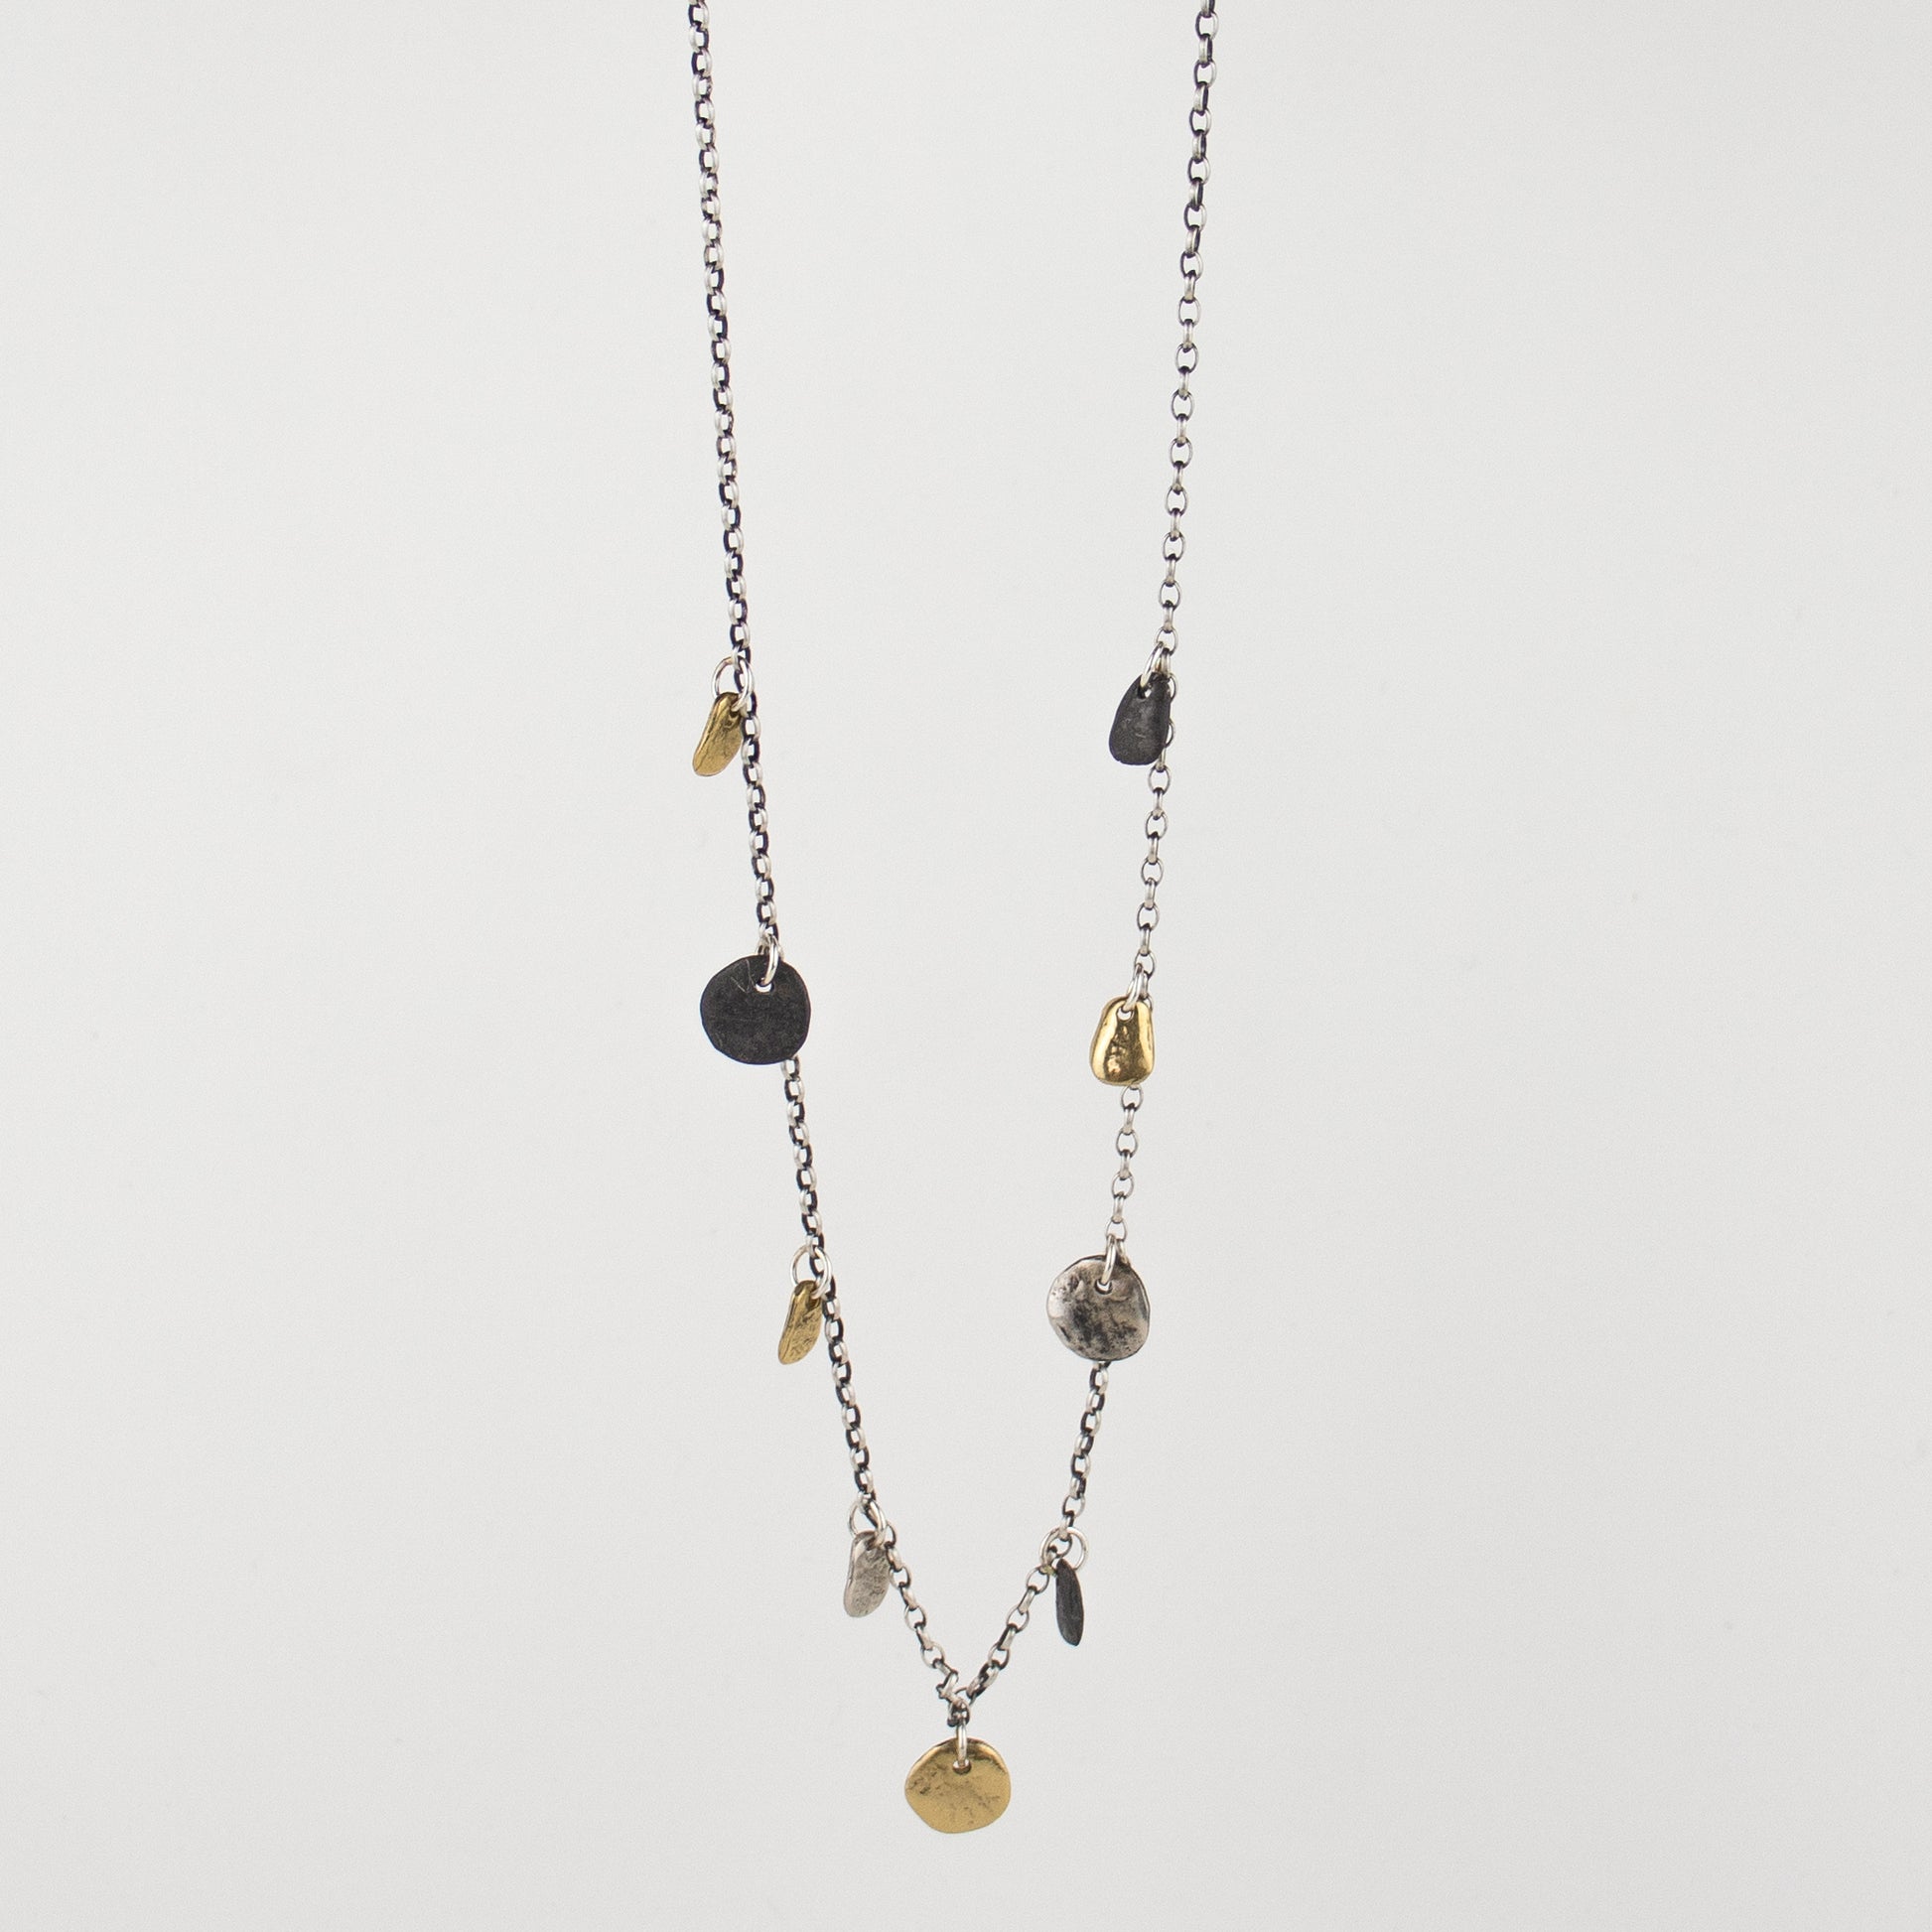 Solid reclaimed sterling silver and brass Maine multi-rock necklace on sterling cable-chain adjustable 18 - 22 inches handmade and finished in our Catskills store-studio.